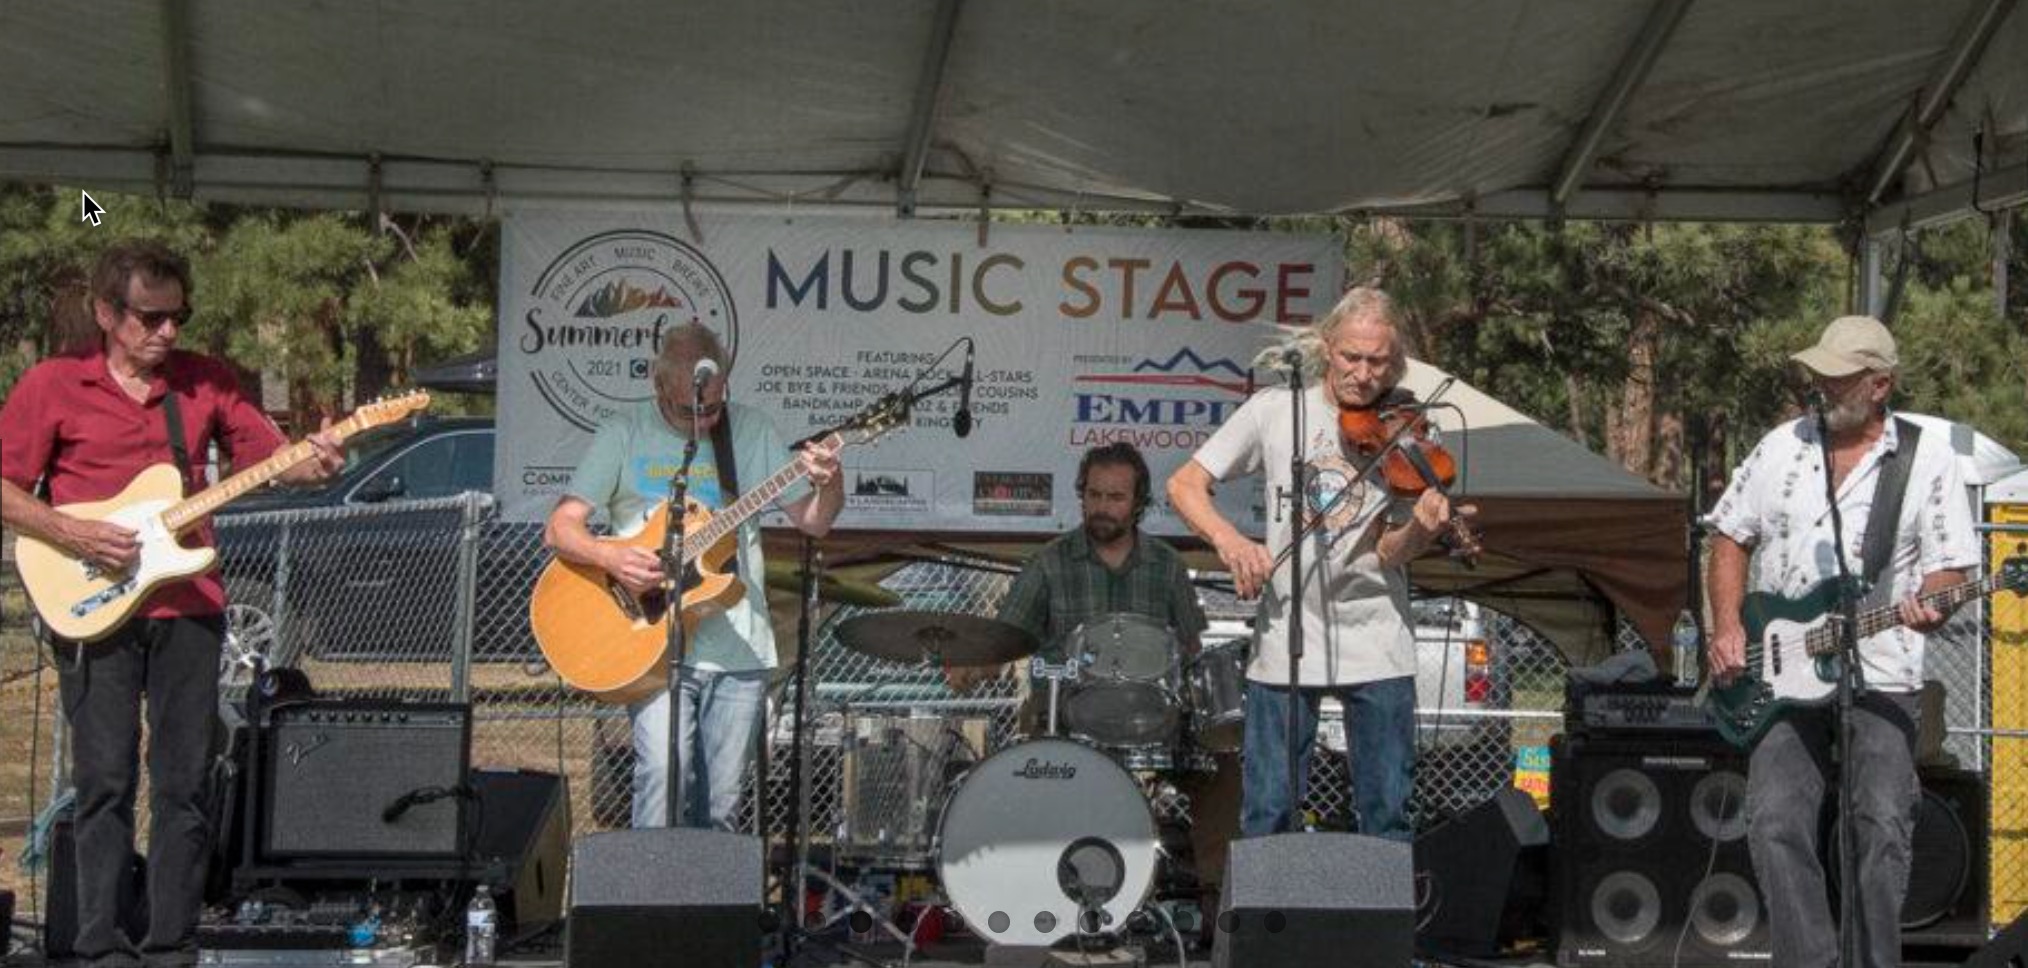 Group of 5 people playing music on a stage at a festival.